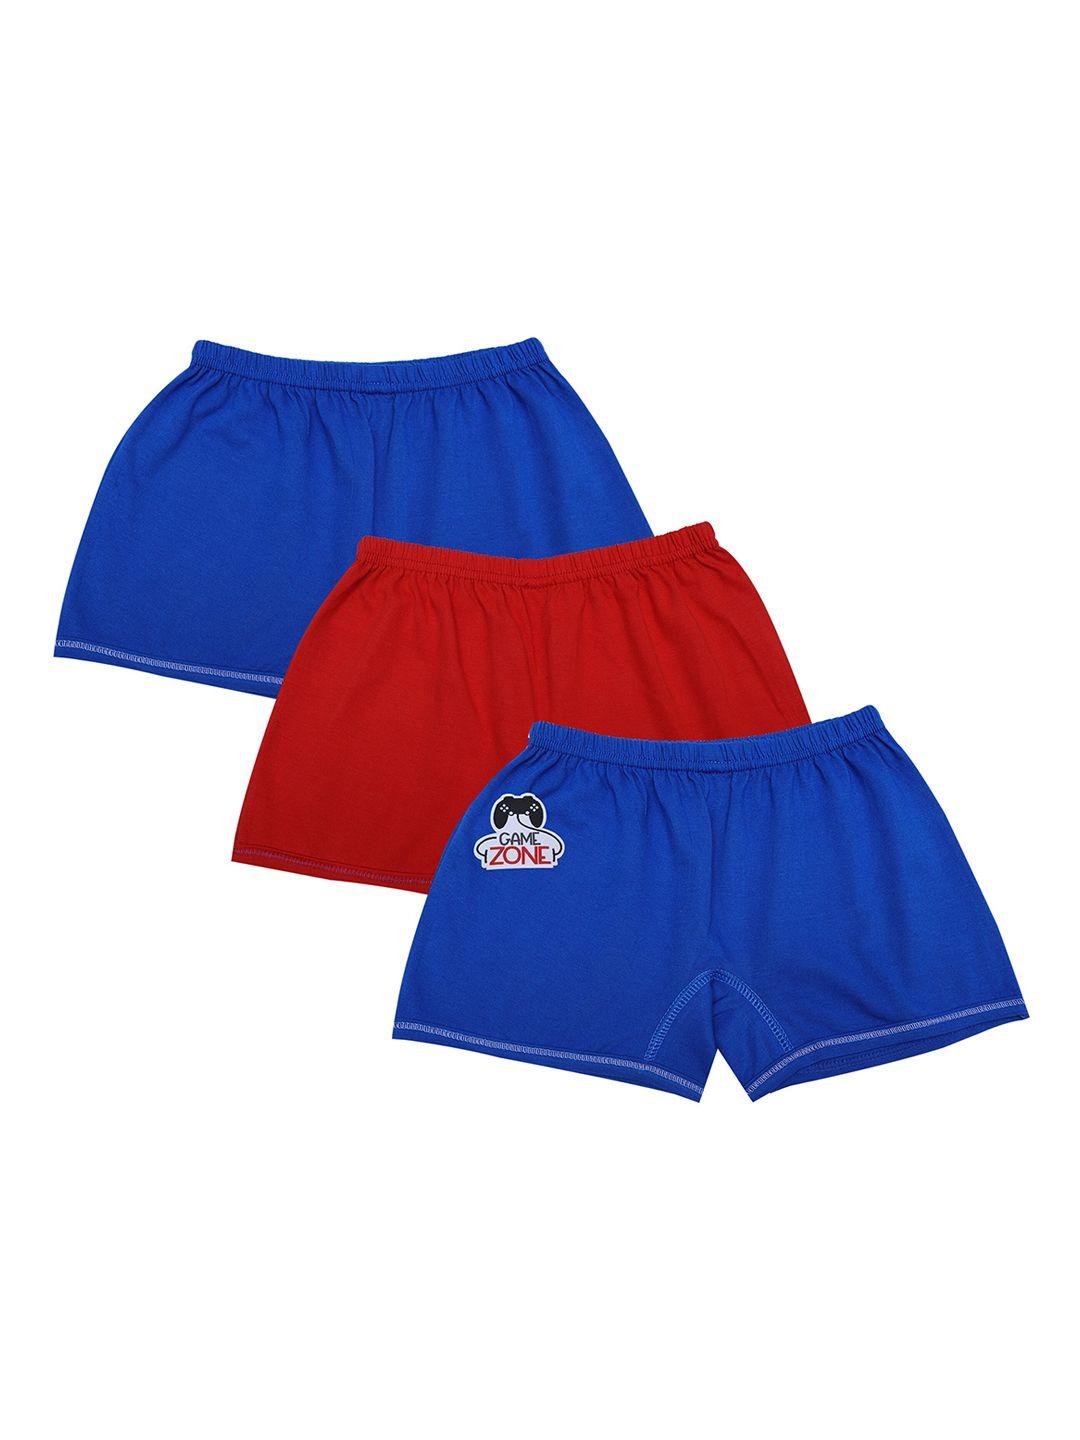 d'chica boys set of 3 solid shorts